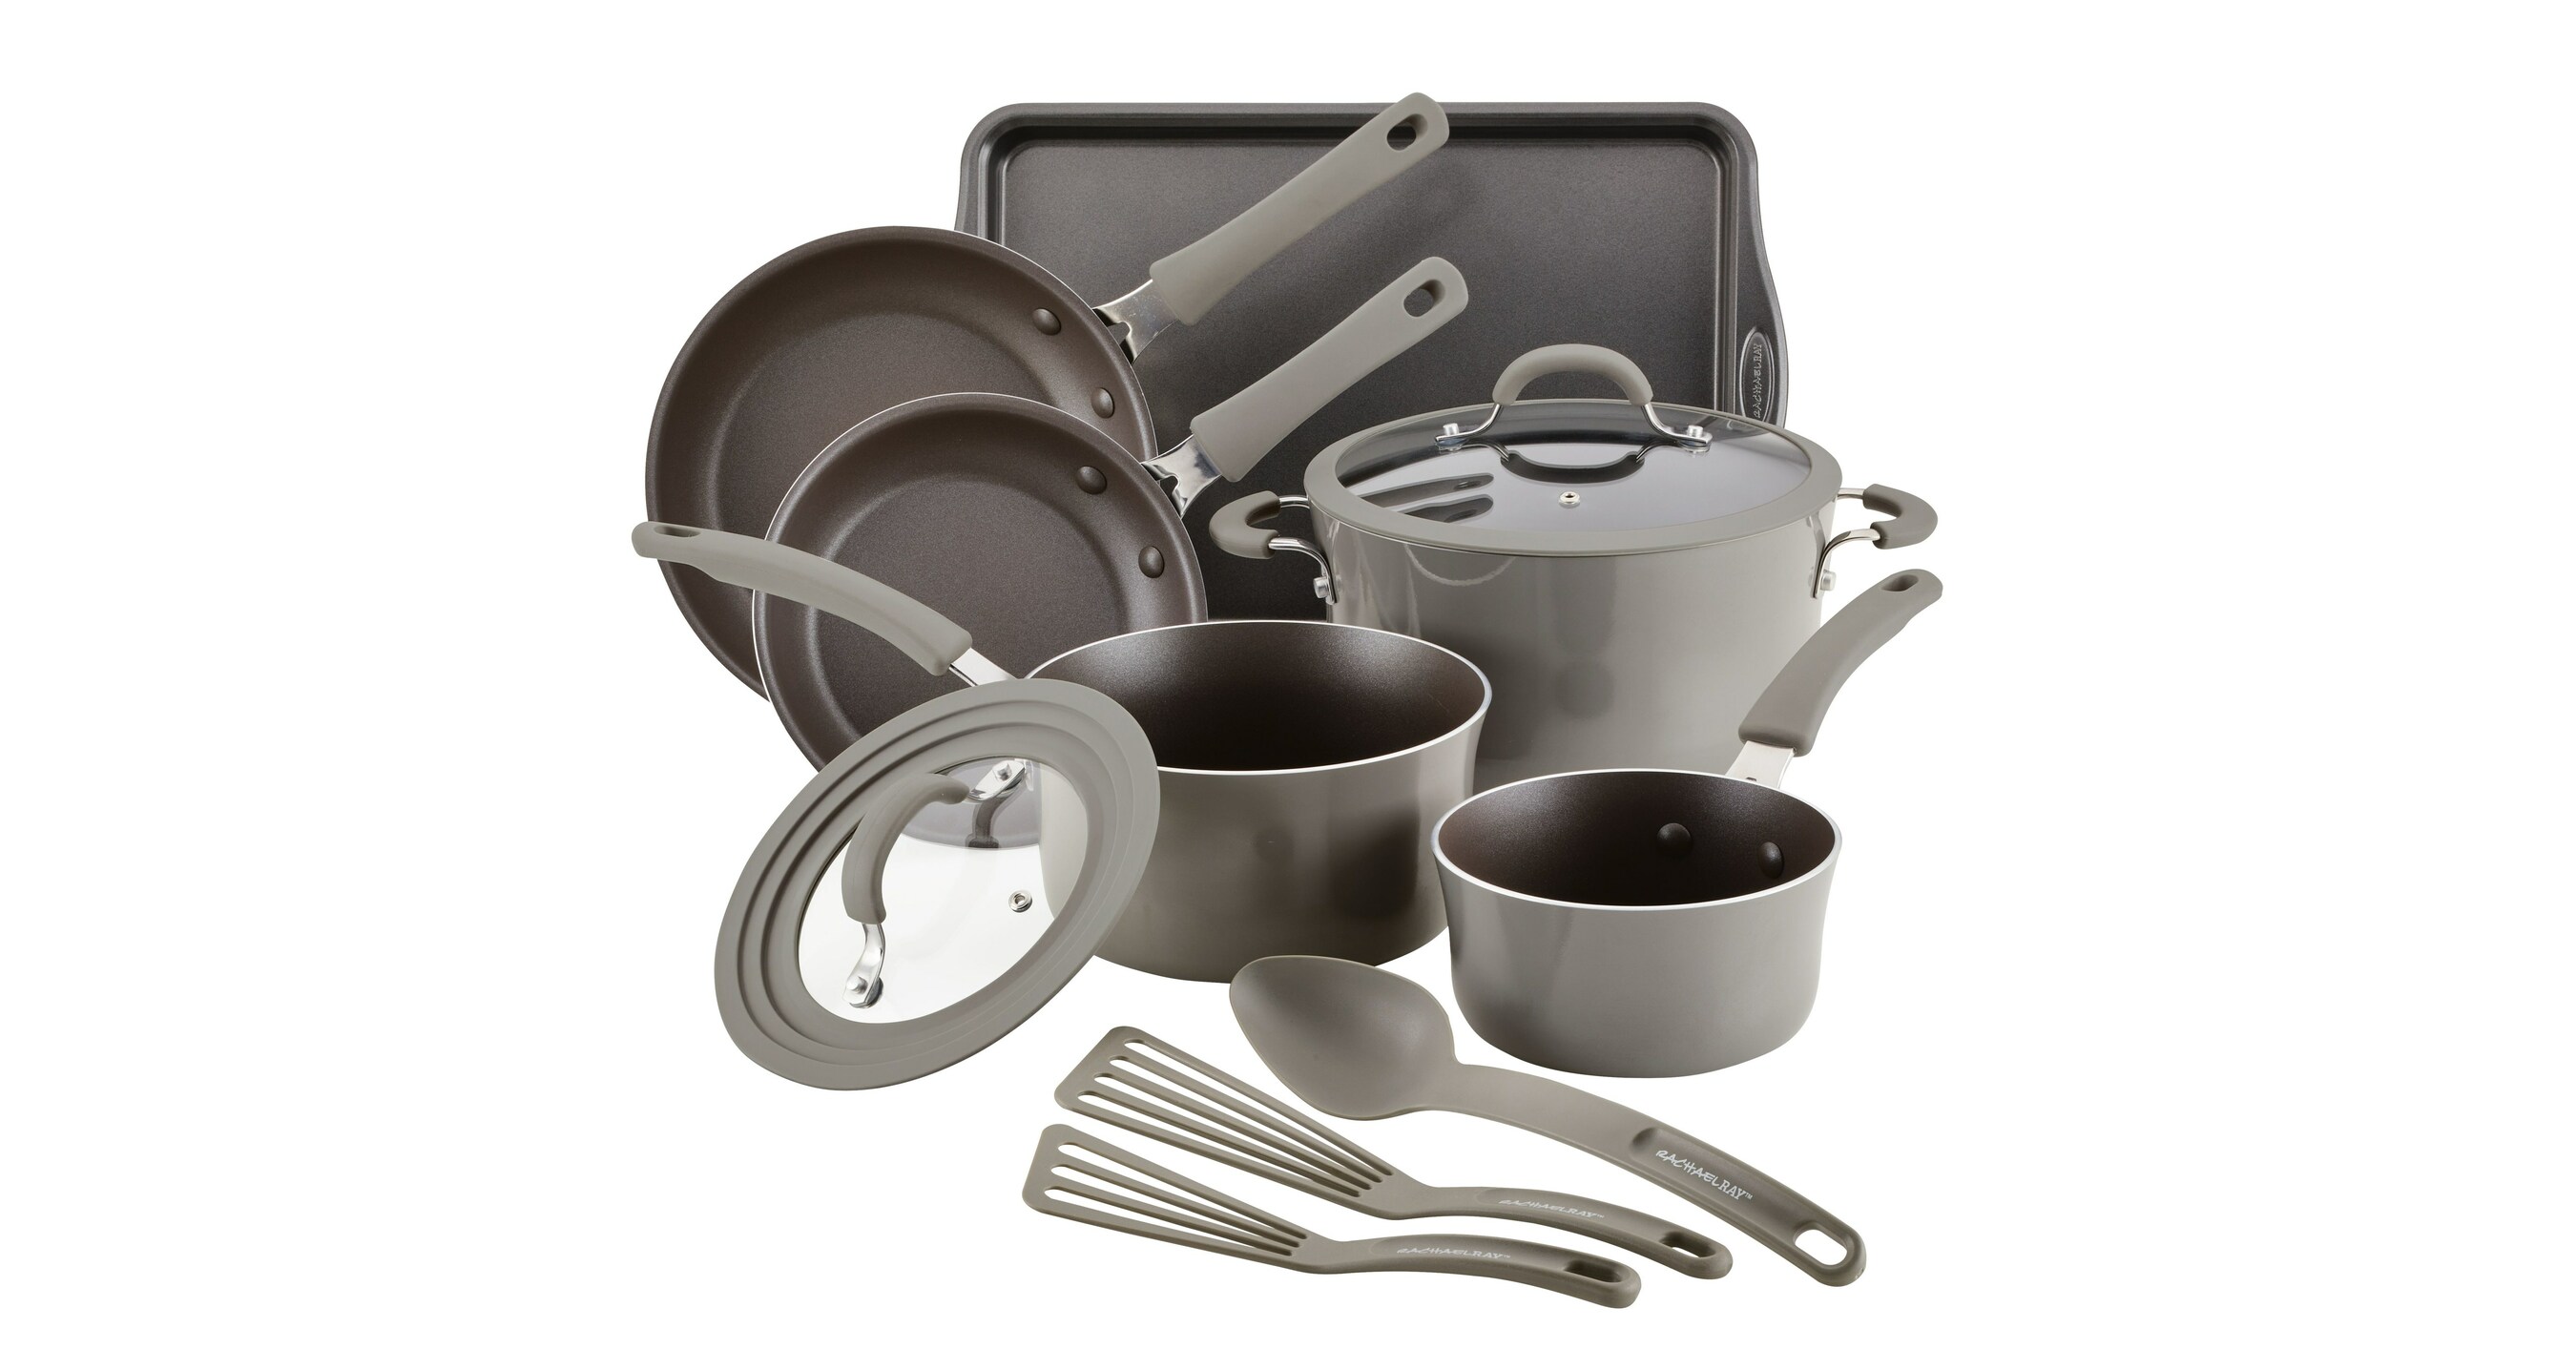 Rachael Ray Create Delicious 13pc Enameled Aluminum Cookware, Gray